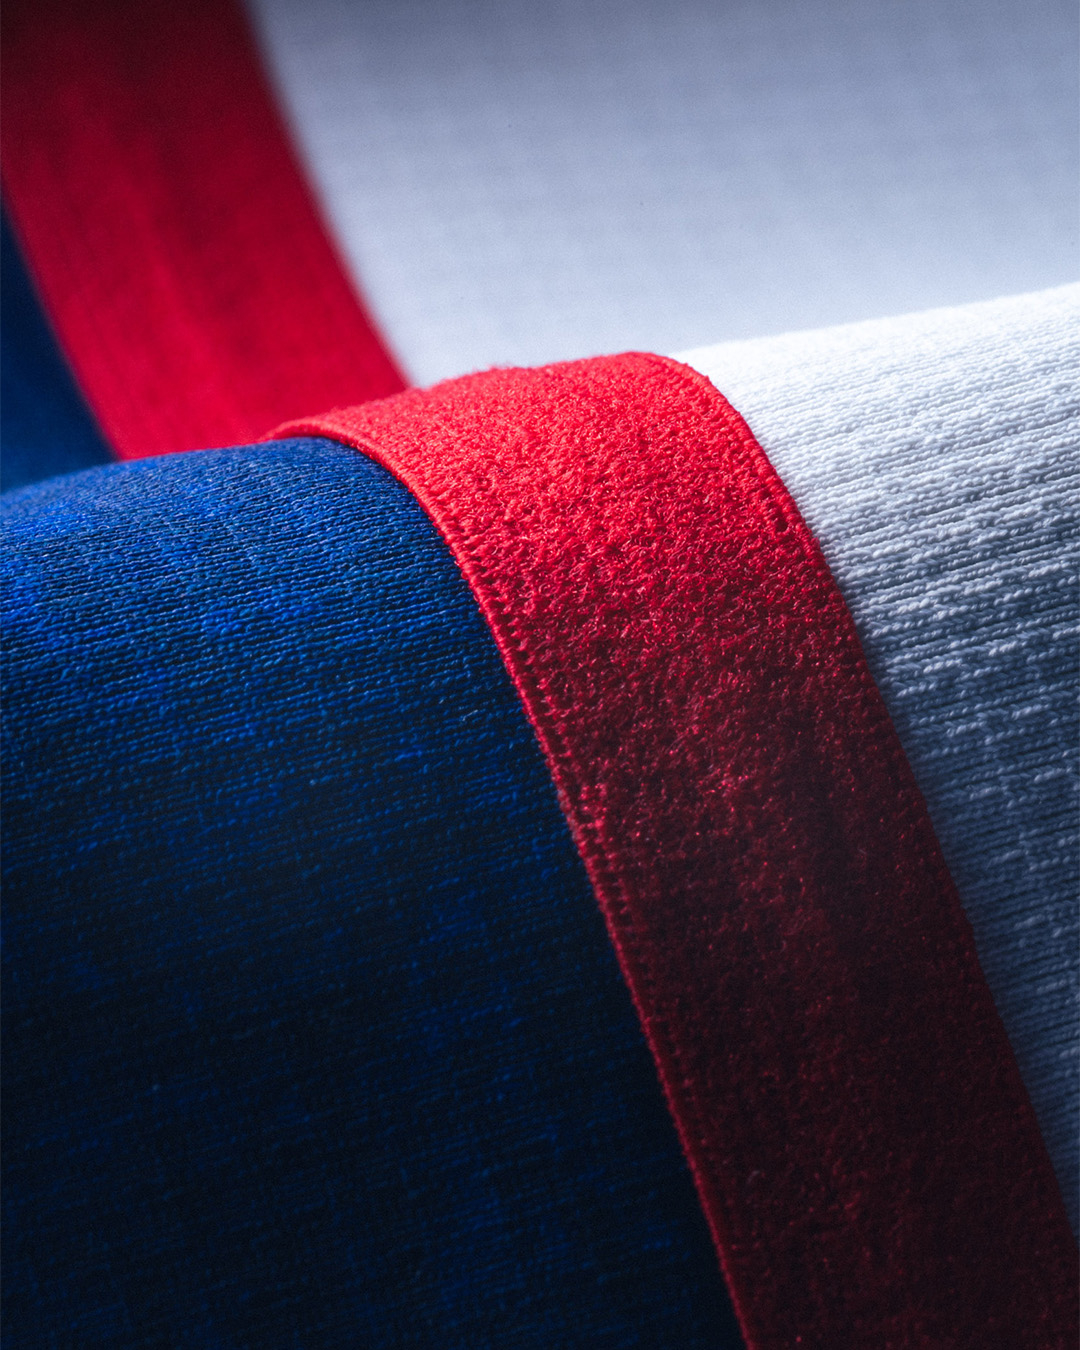 Close-up of a red, white, and blue fabric with different textures